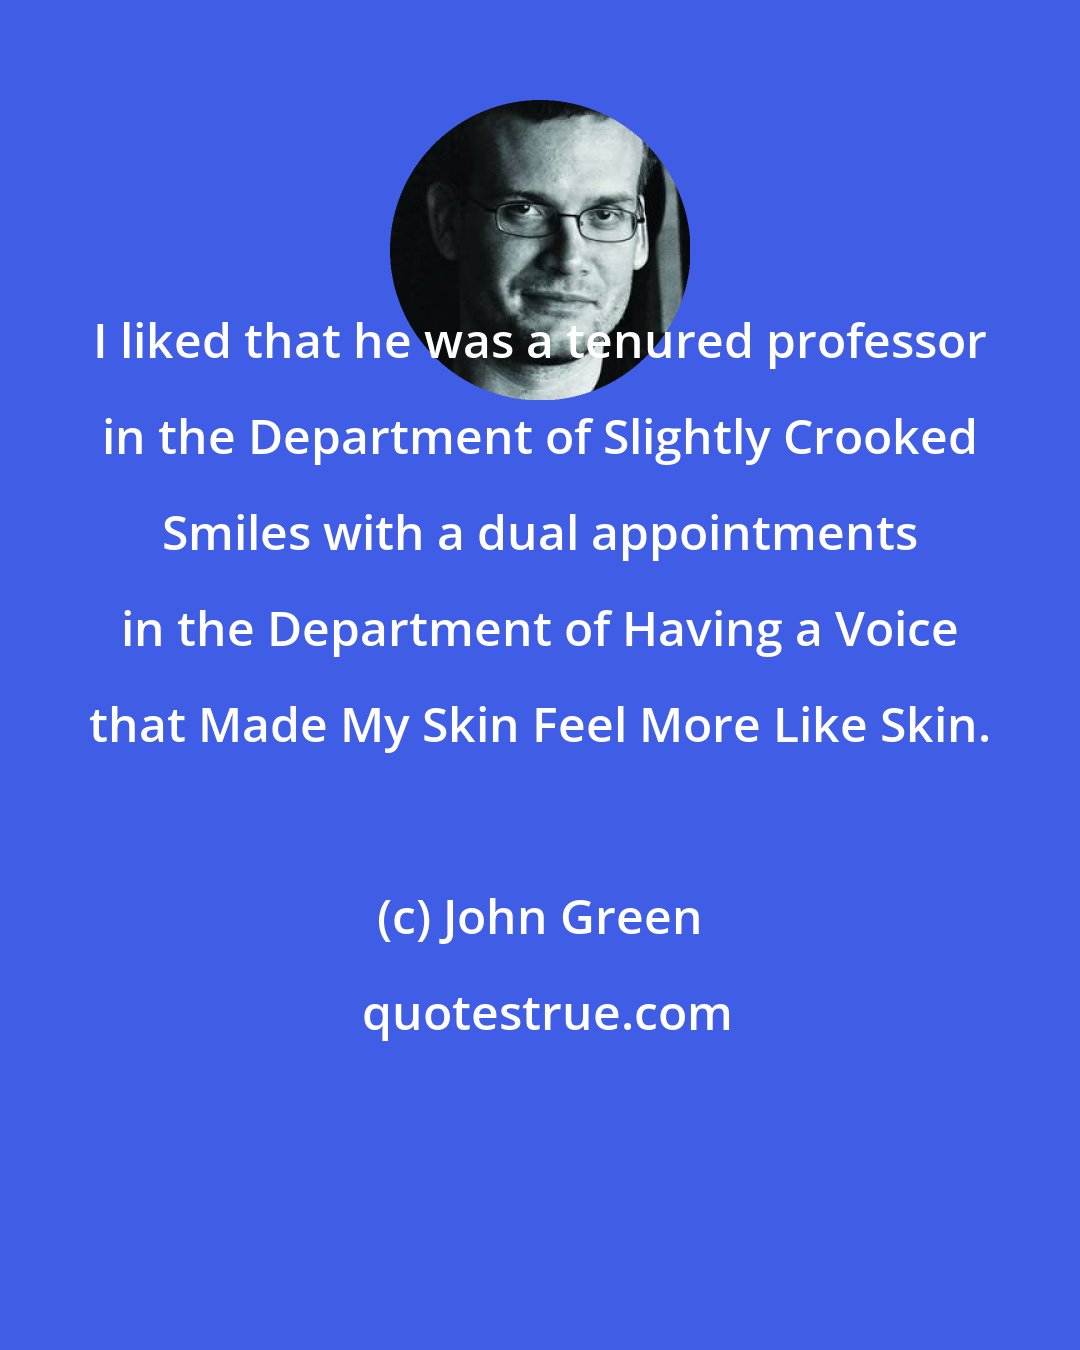 John Green: I liked that he was a tenured professor in the Department of Slightly Crooked Smiles with a dual appointments in the Department of Having a Voice that Made My Skin Feel More Like Skin.